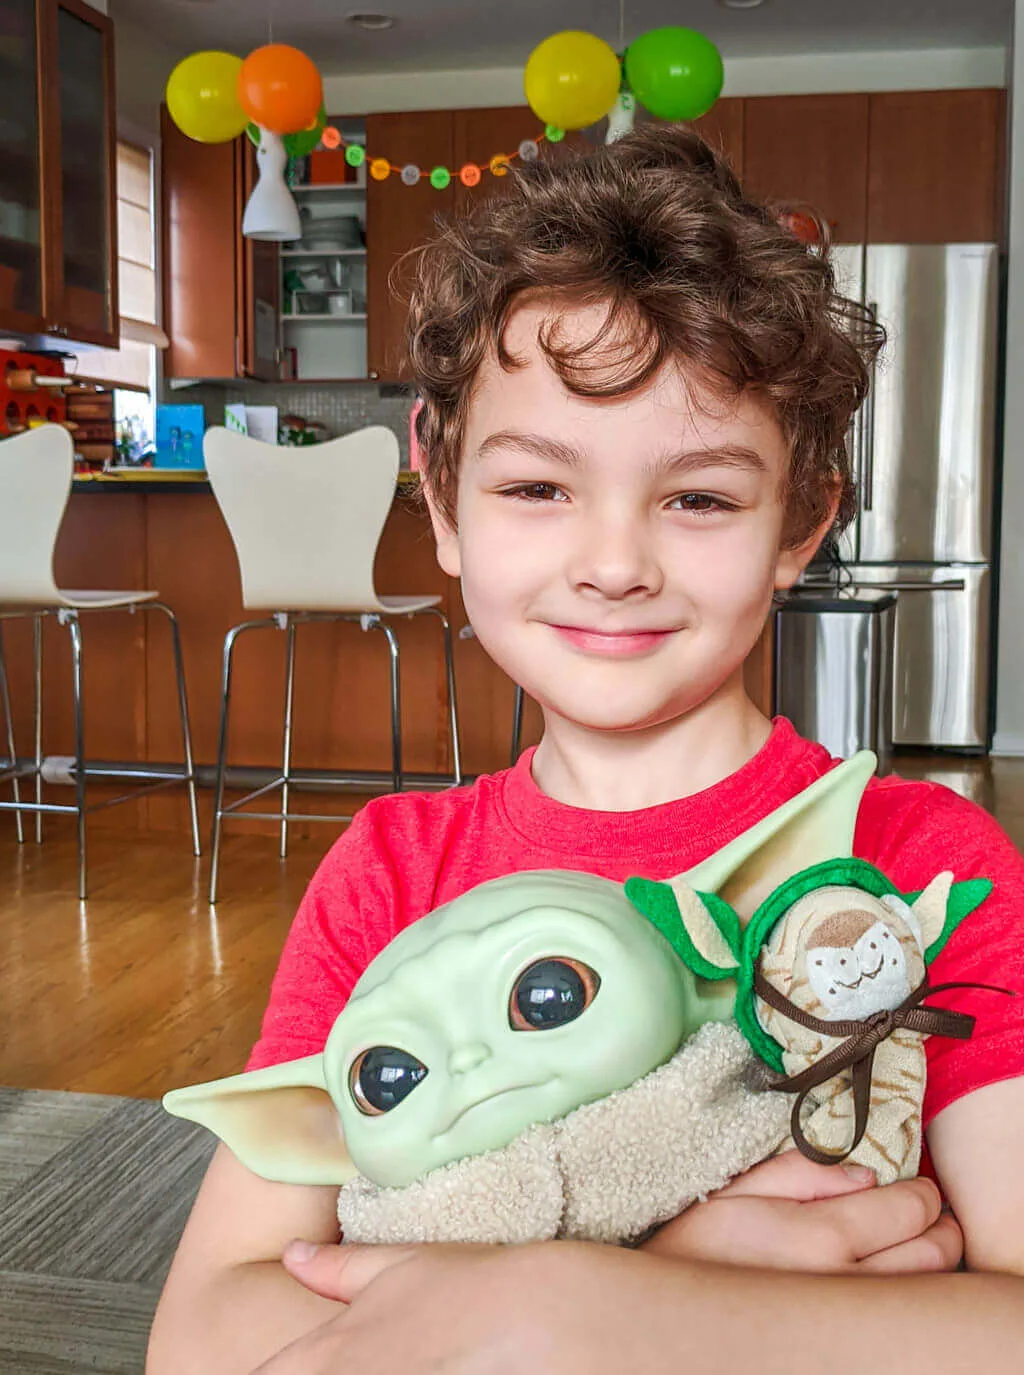 Liam with Baby Yoda doll. Copyright Merriment Design Co. Do not use without written permission.